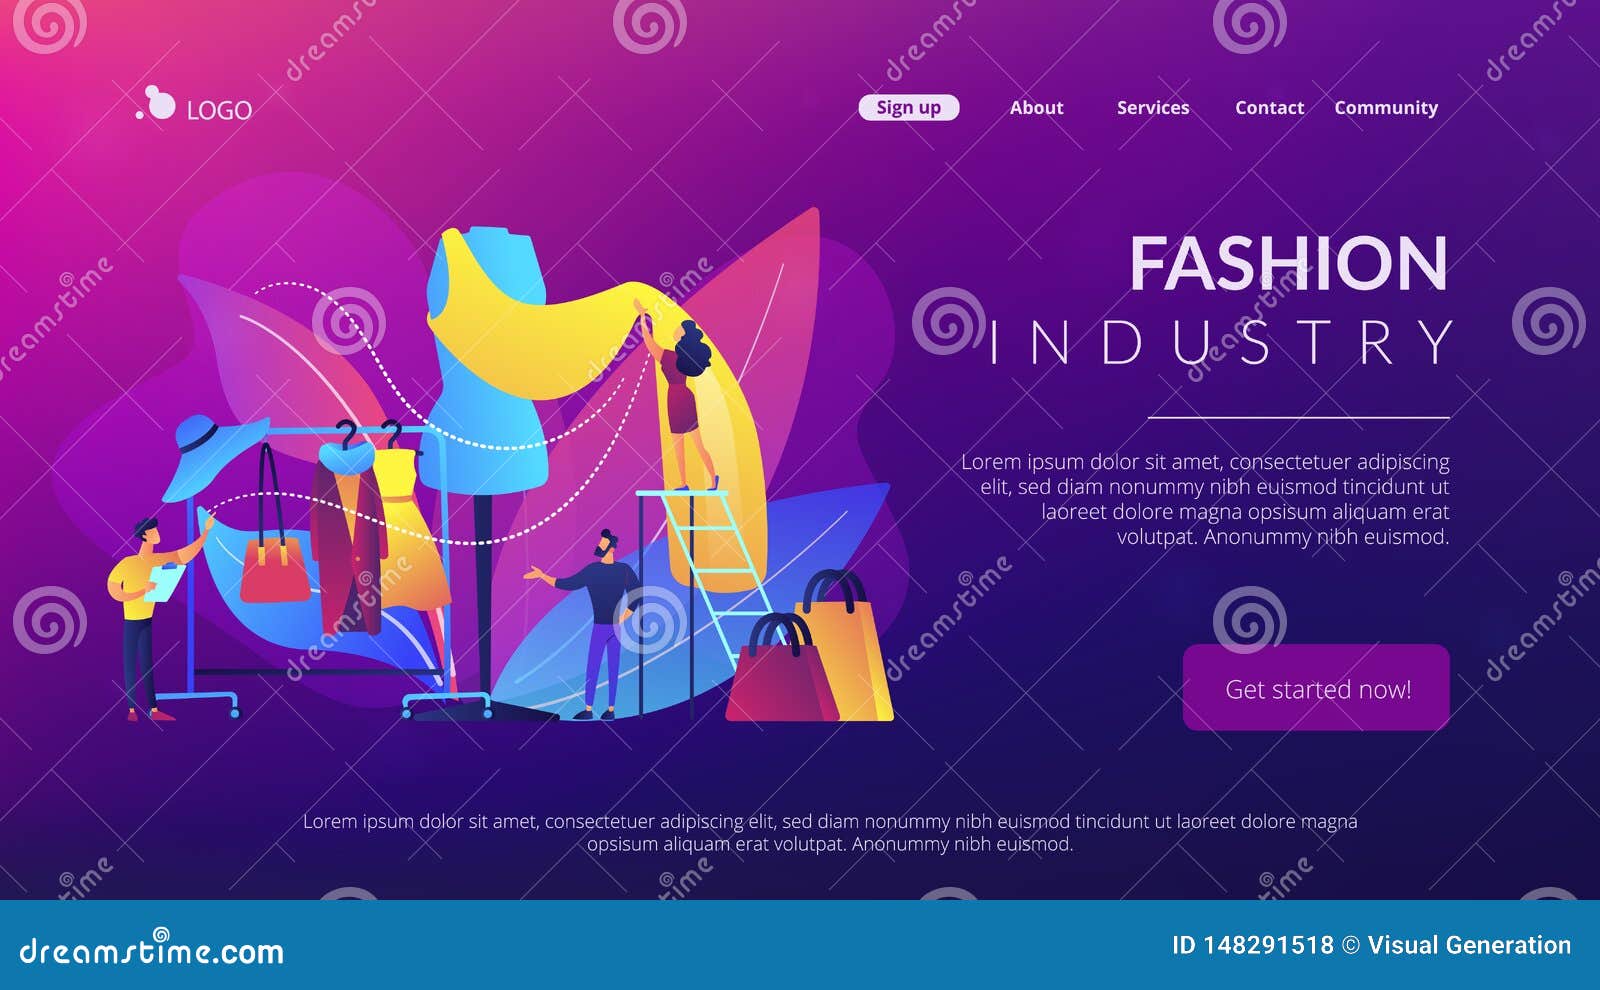 Fashion Industry Concept Landing Page. Stock Vector - Illustration of ...